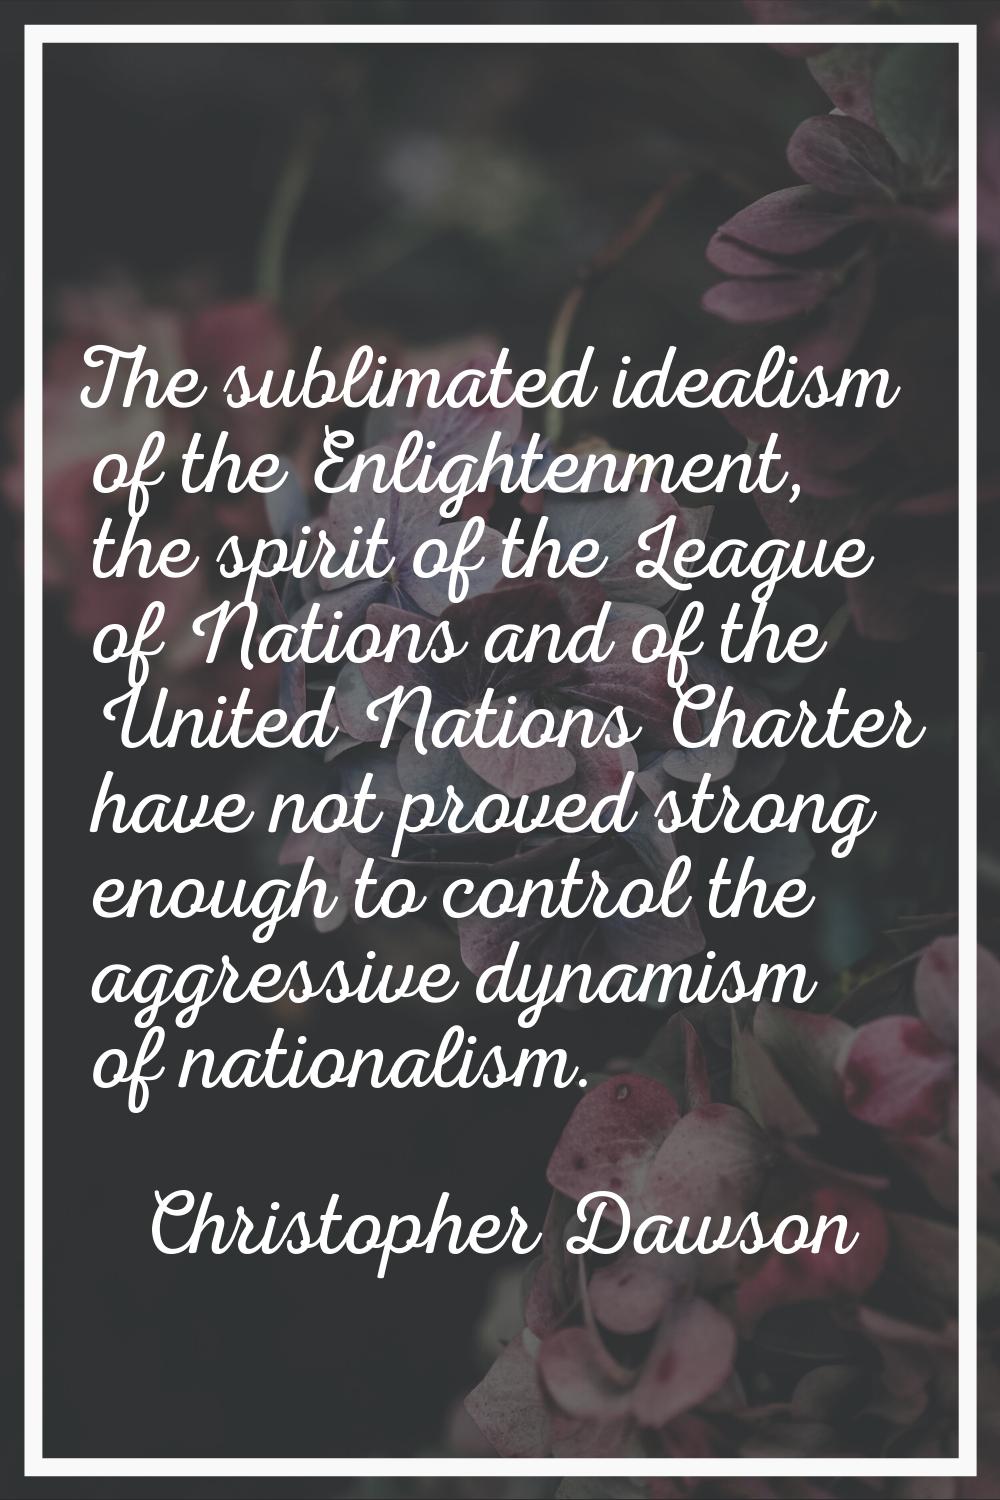 The sublimated idealism of the Enlightenment, the spirit of the League of Nations and of the United